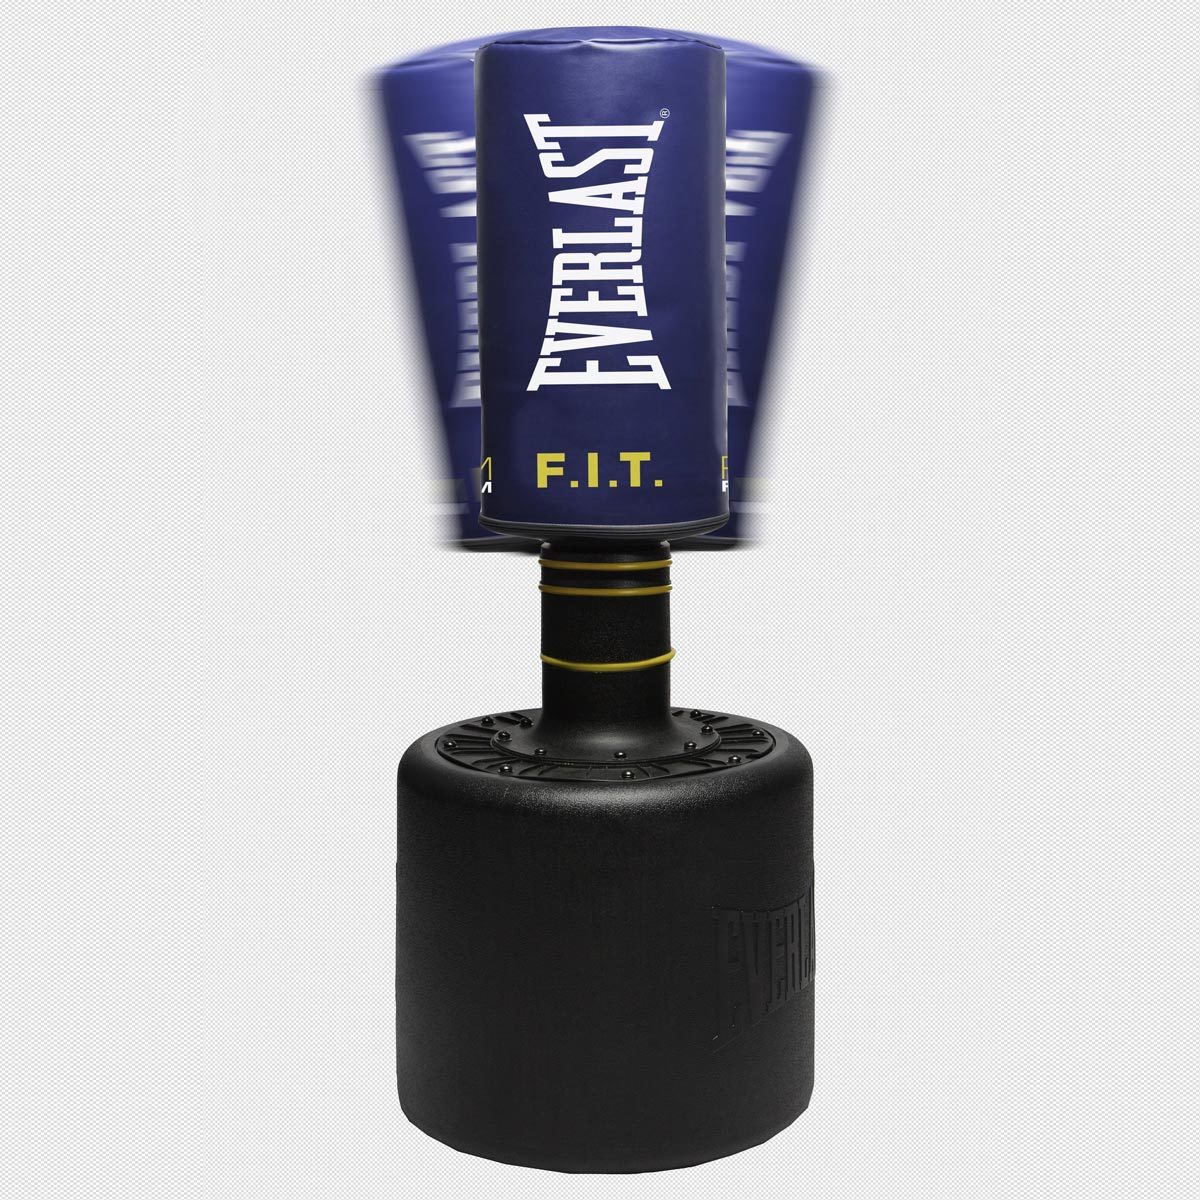 Everlast Fit Powercore Free Standing Punch Bag and Accessories